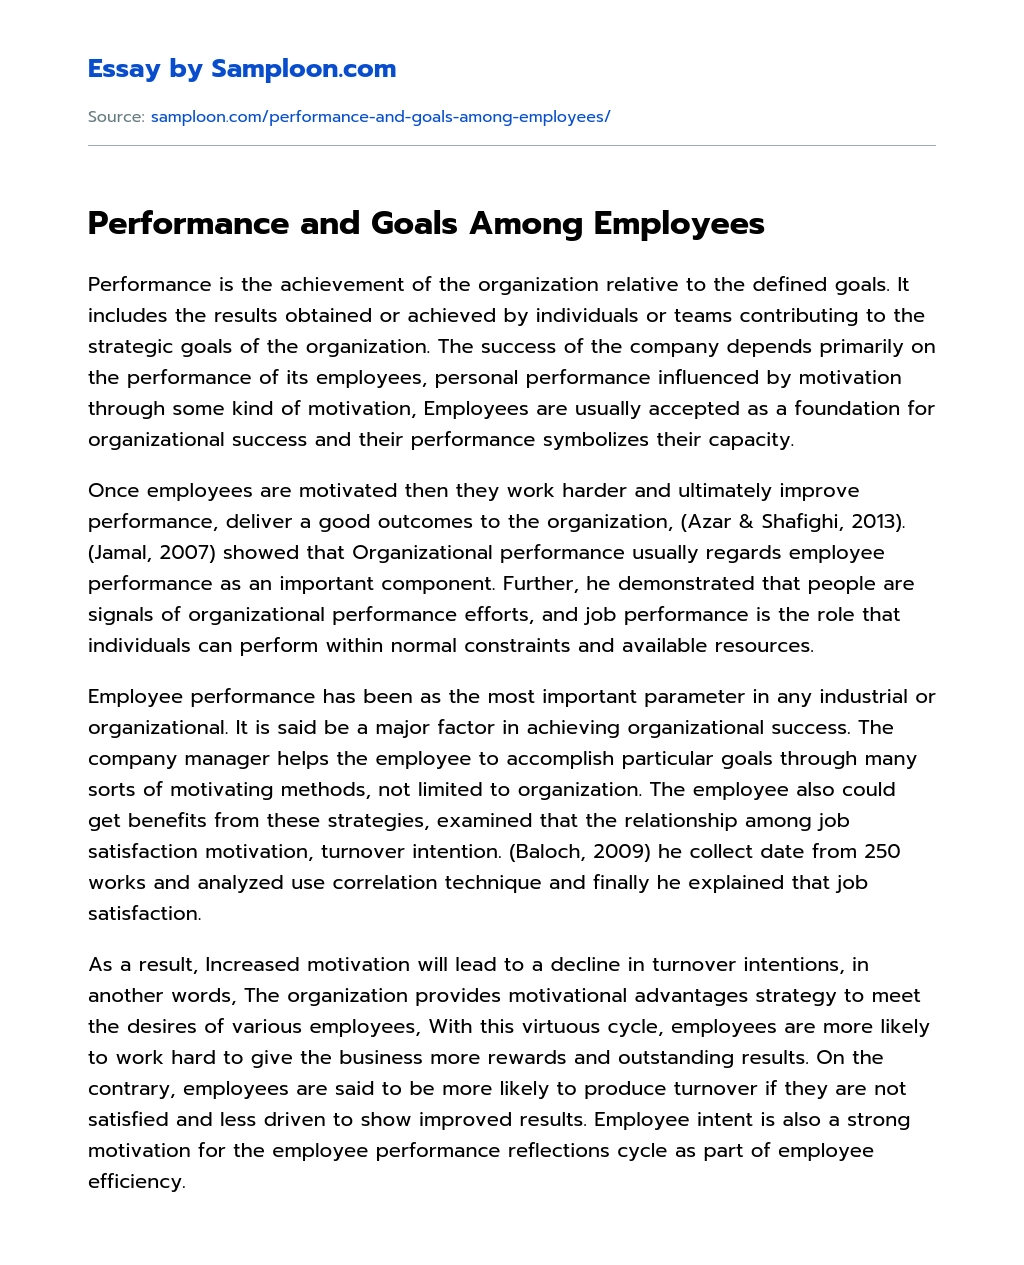 Performance and Goals Among Employees essay